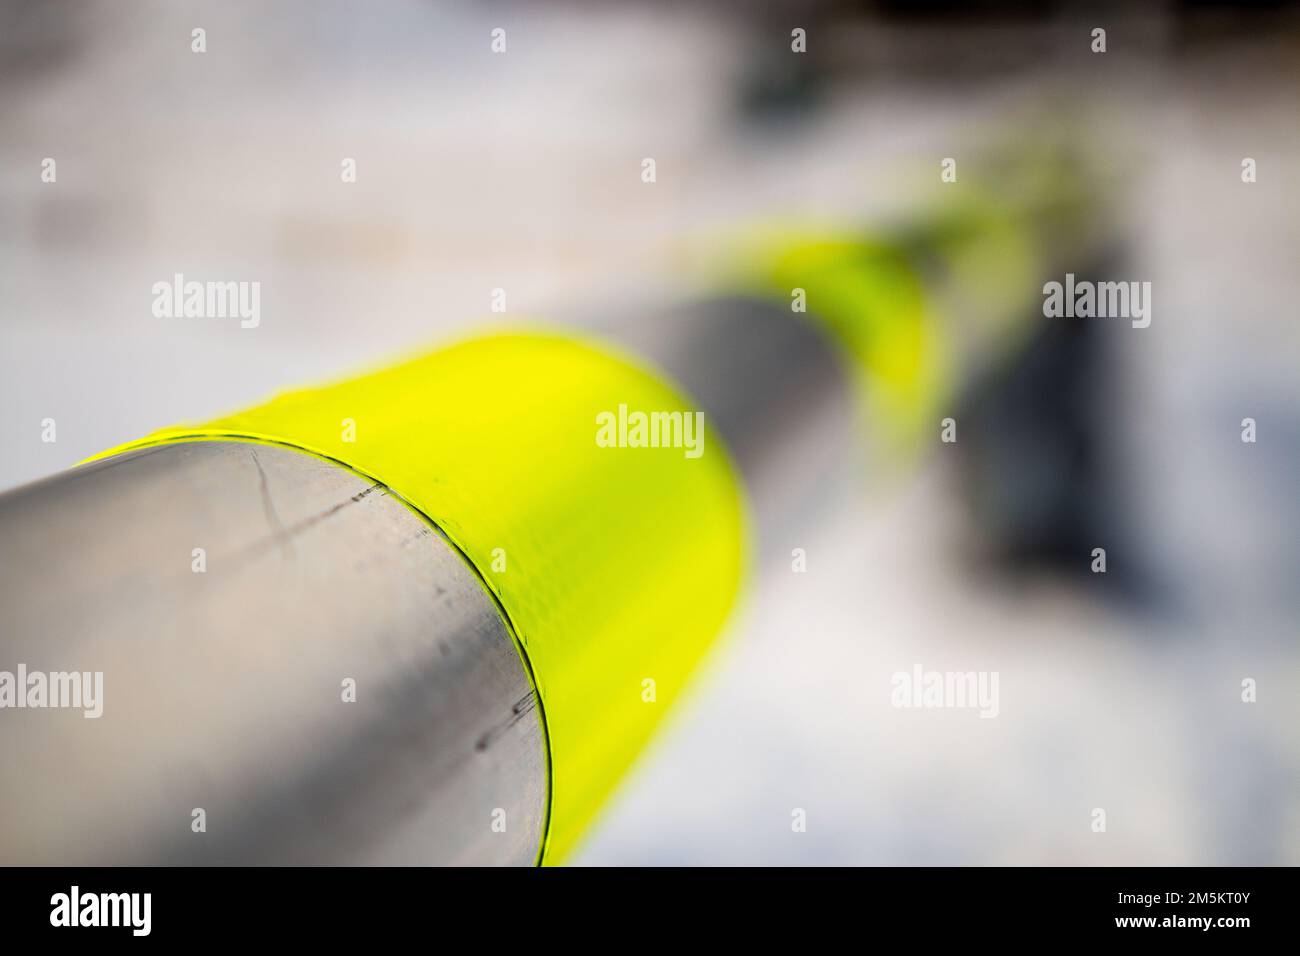 A closeup shot of industrial metal pipe against blur background Stock Photo